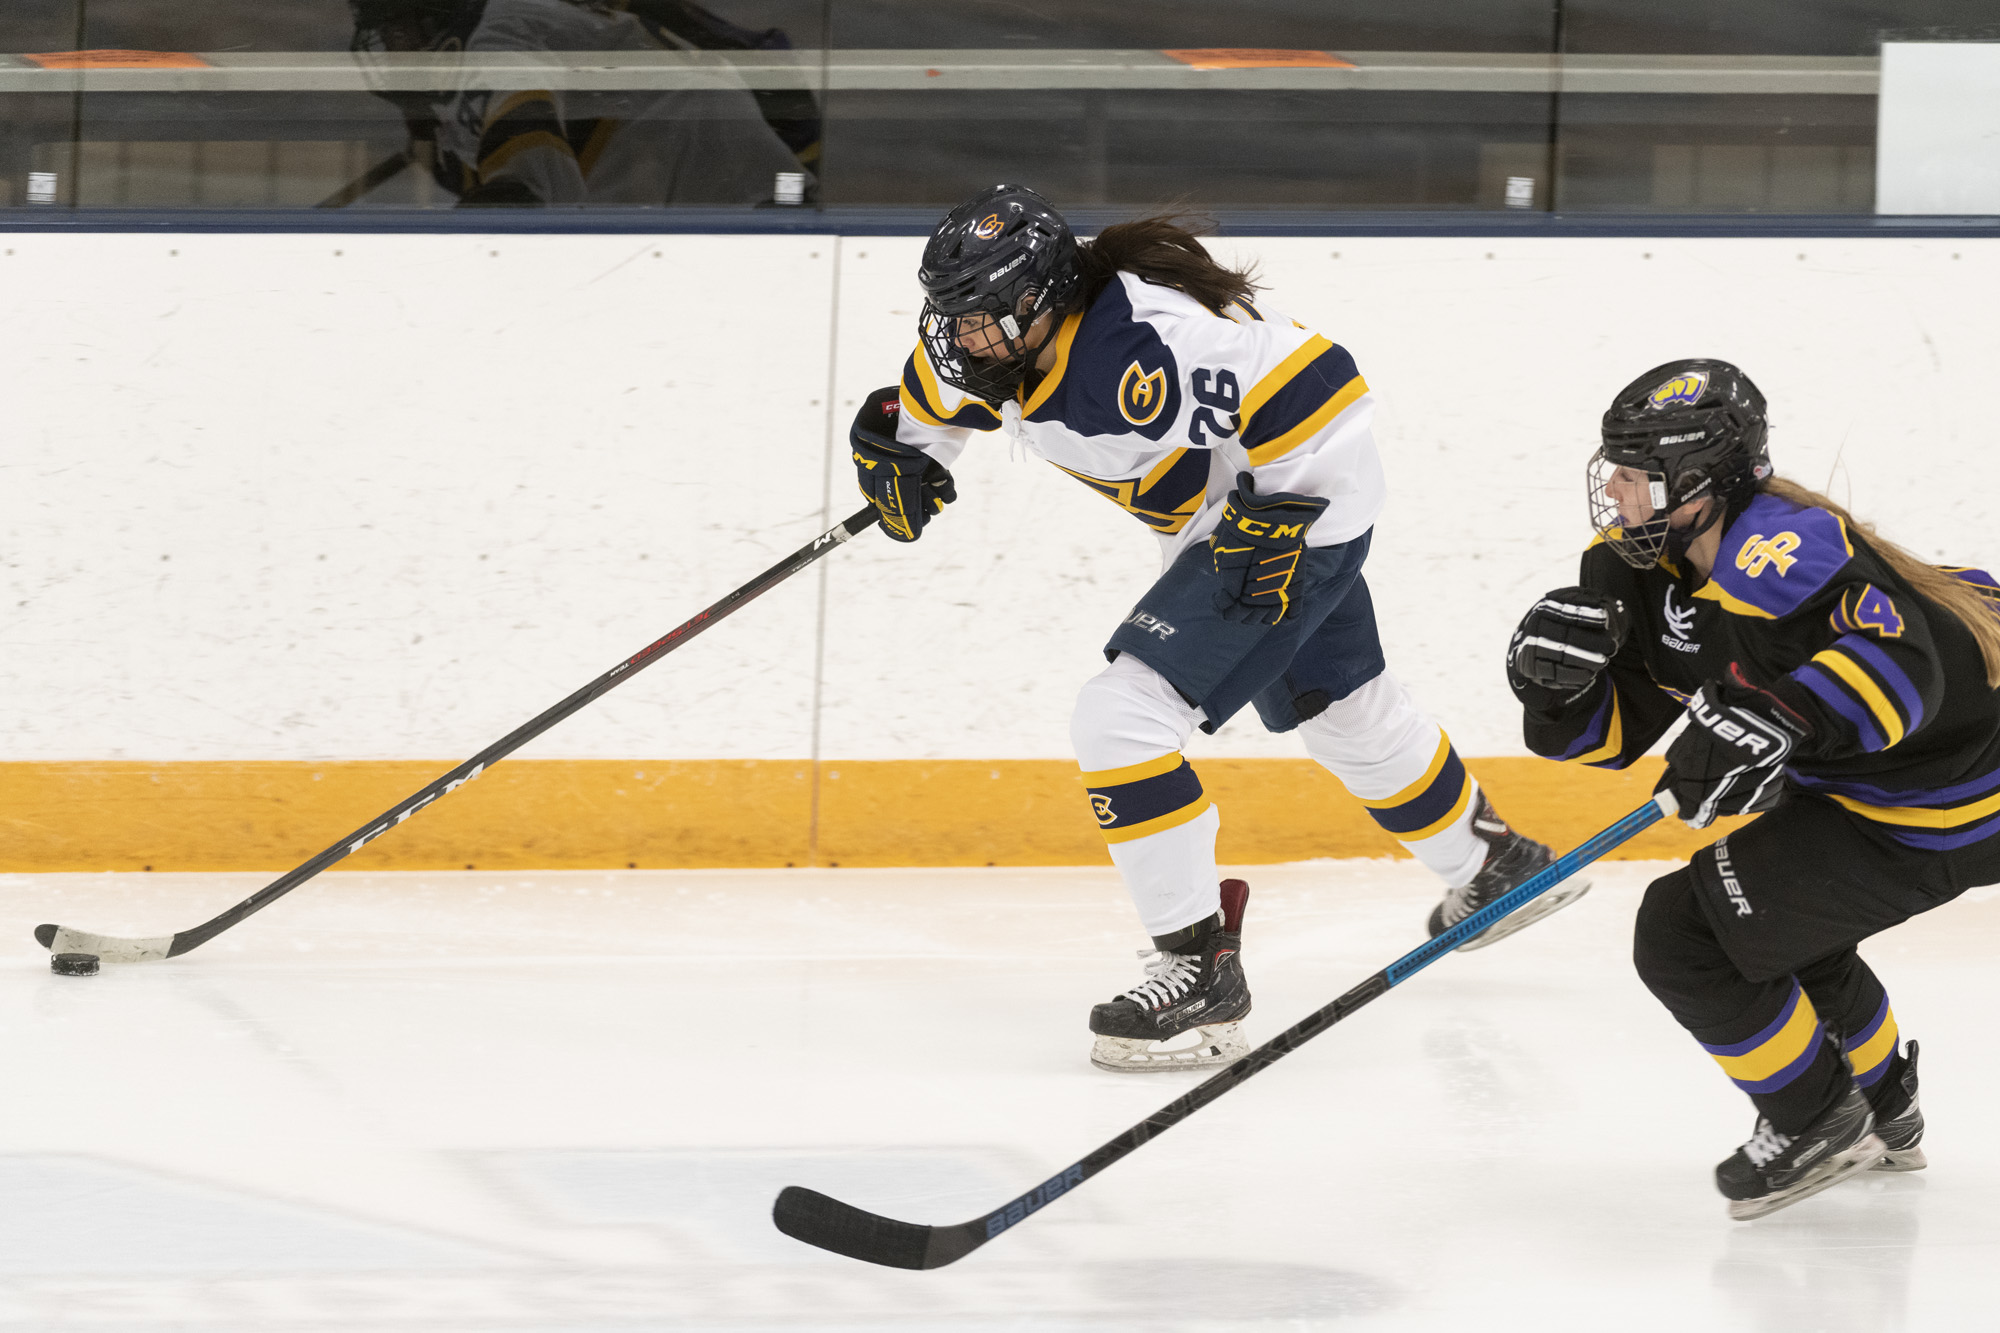 Blugolds score late to earn first win of the season